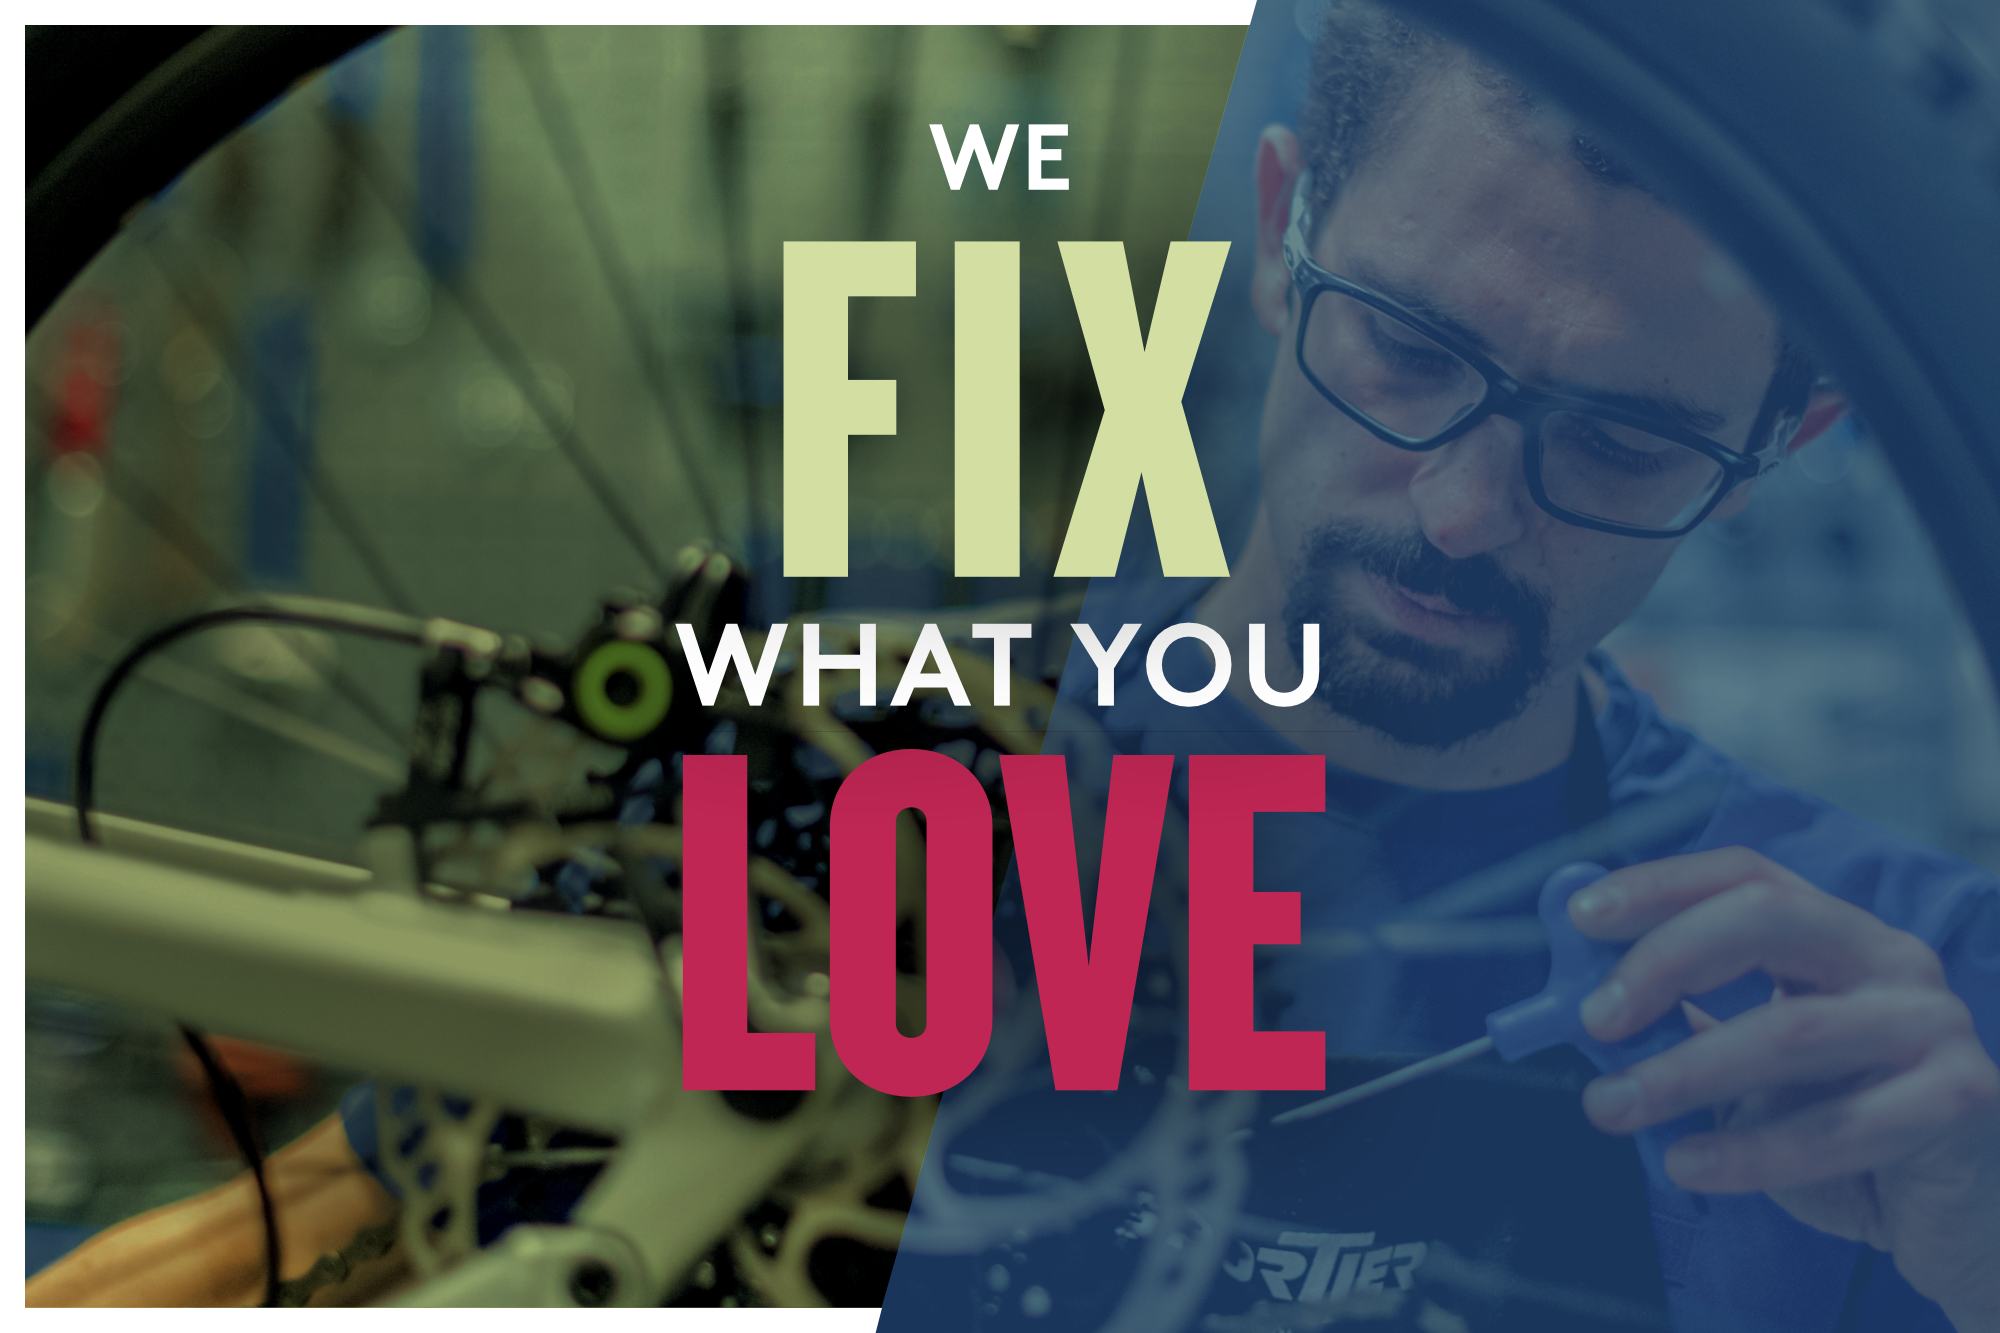 We Fix what you love